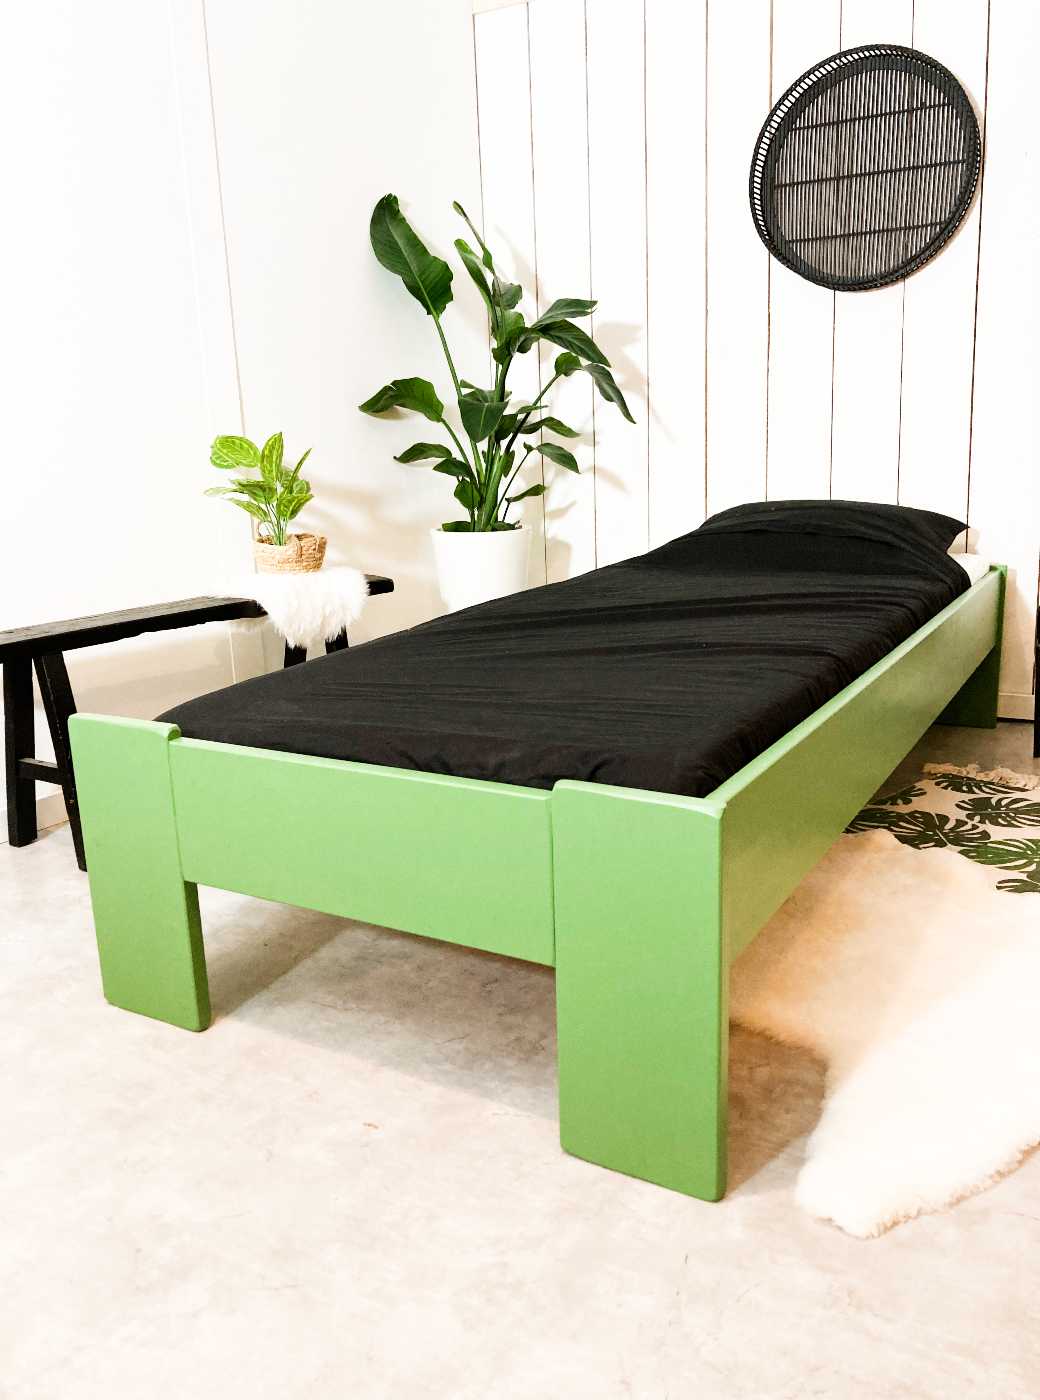 over Soldaat pk Showmodel bed Harm A+A 90×220 groen | Blankhoutmeubelhal